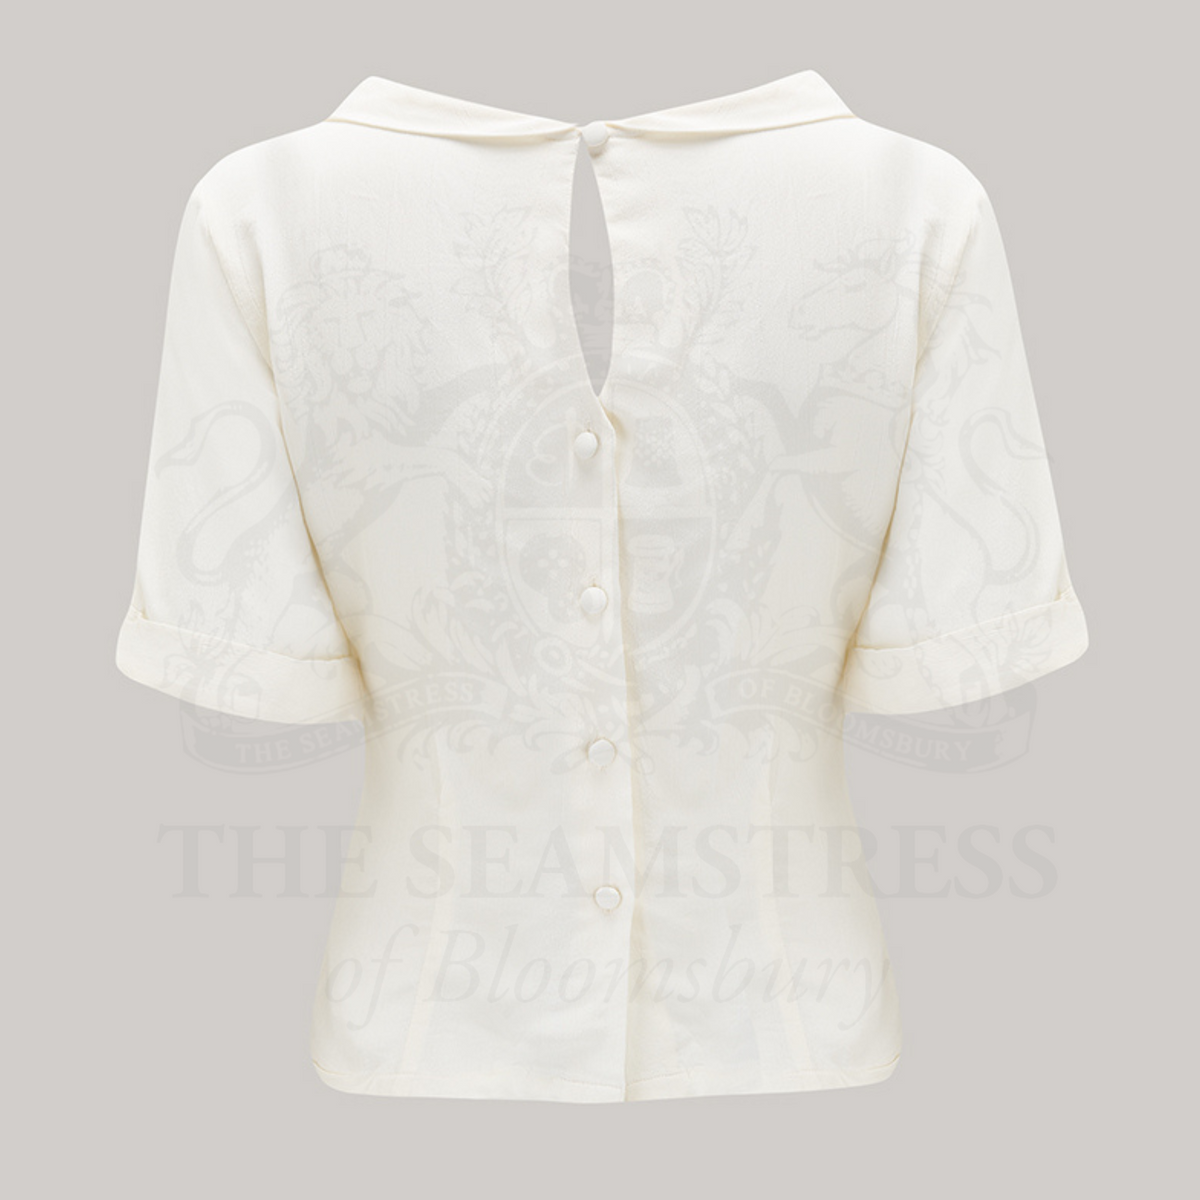 A 1940s style short sleeve cream blouse. Featuring a side tie-neck collar and button fastenings down the back of the blouse.